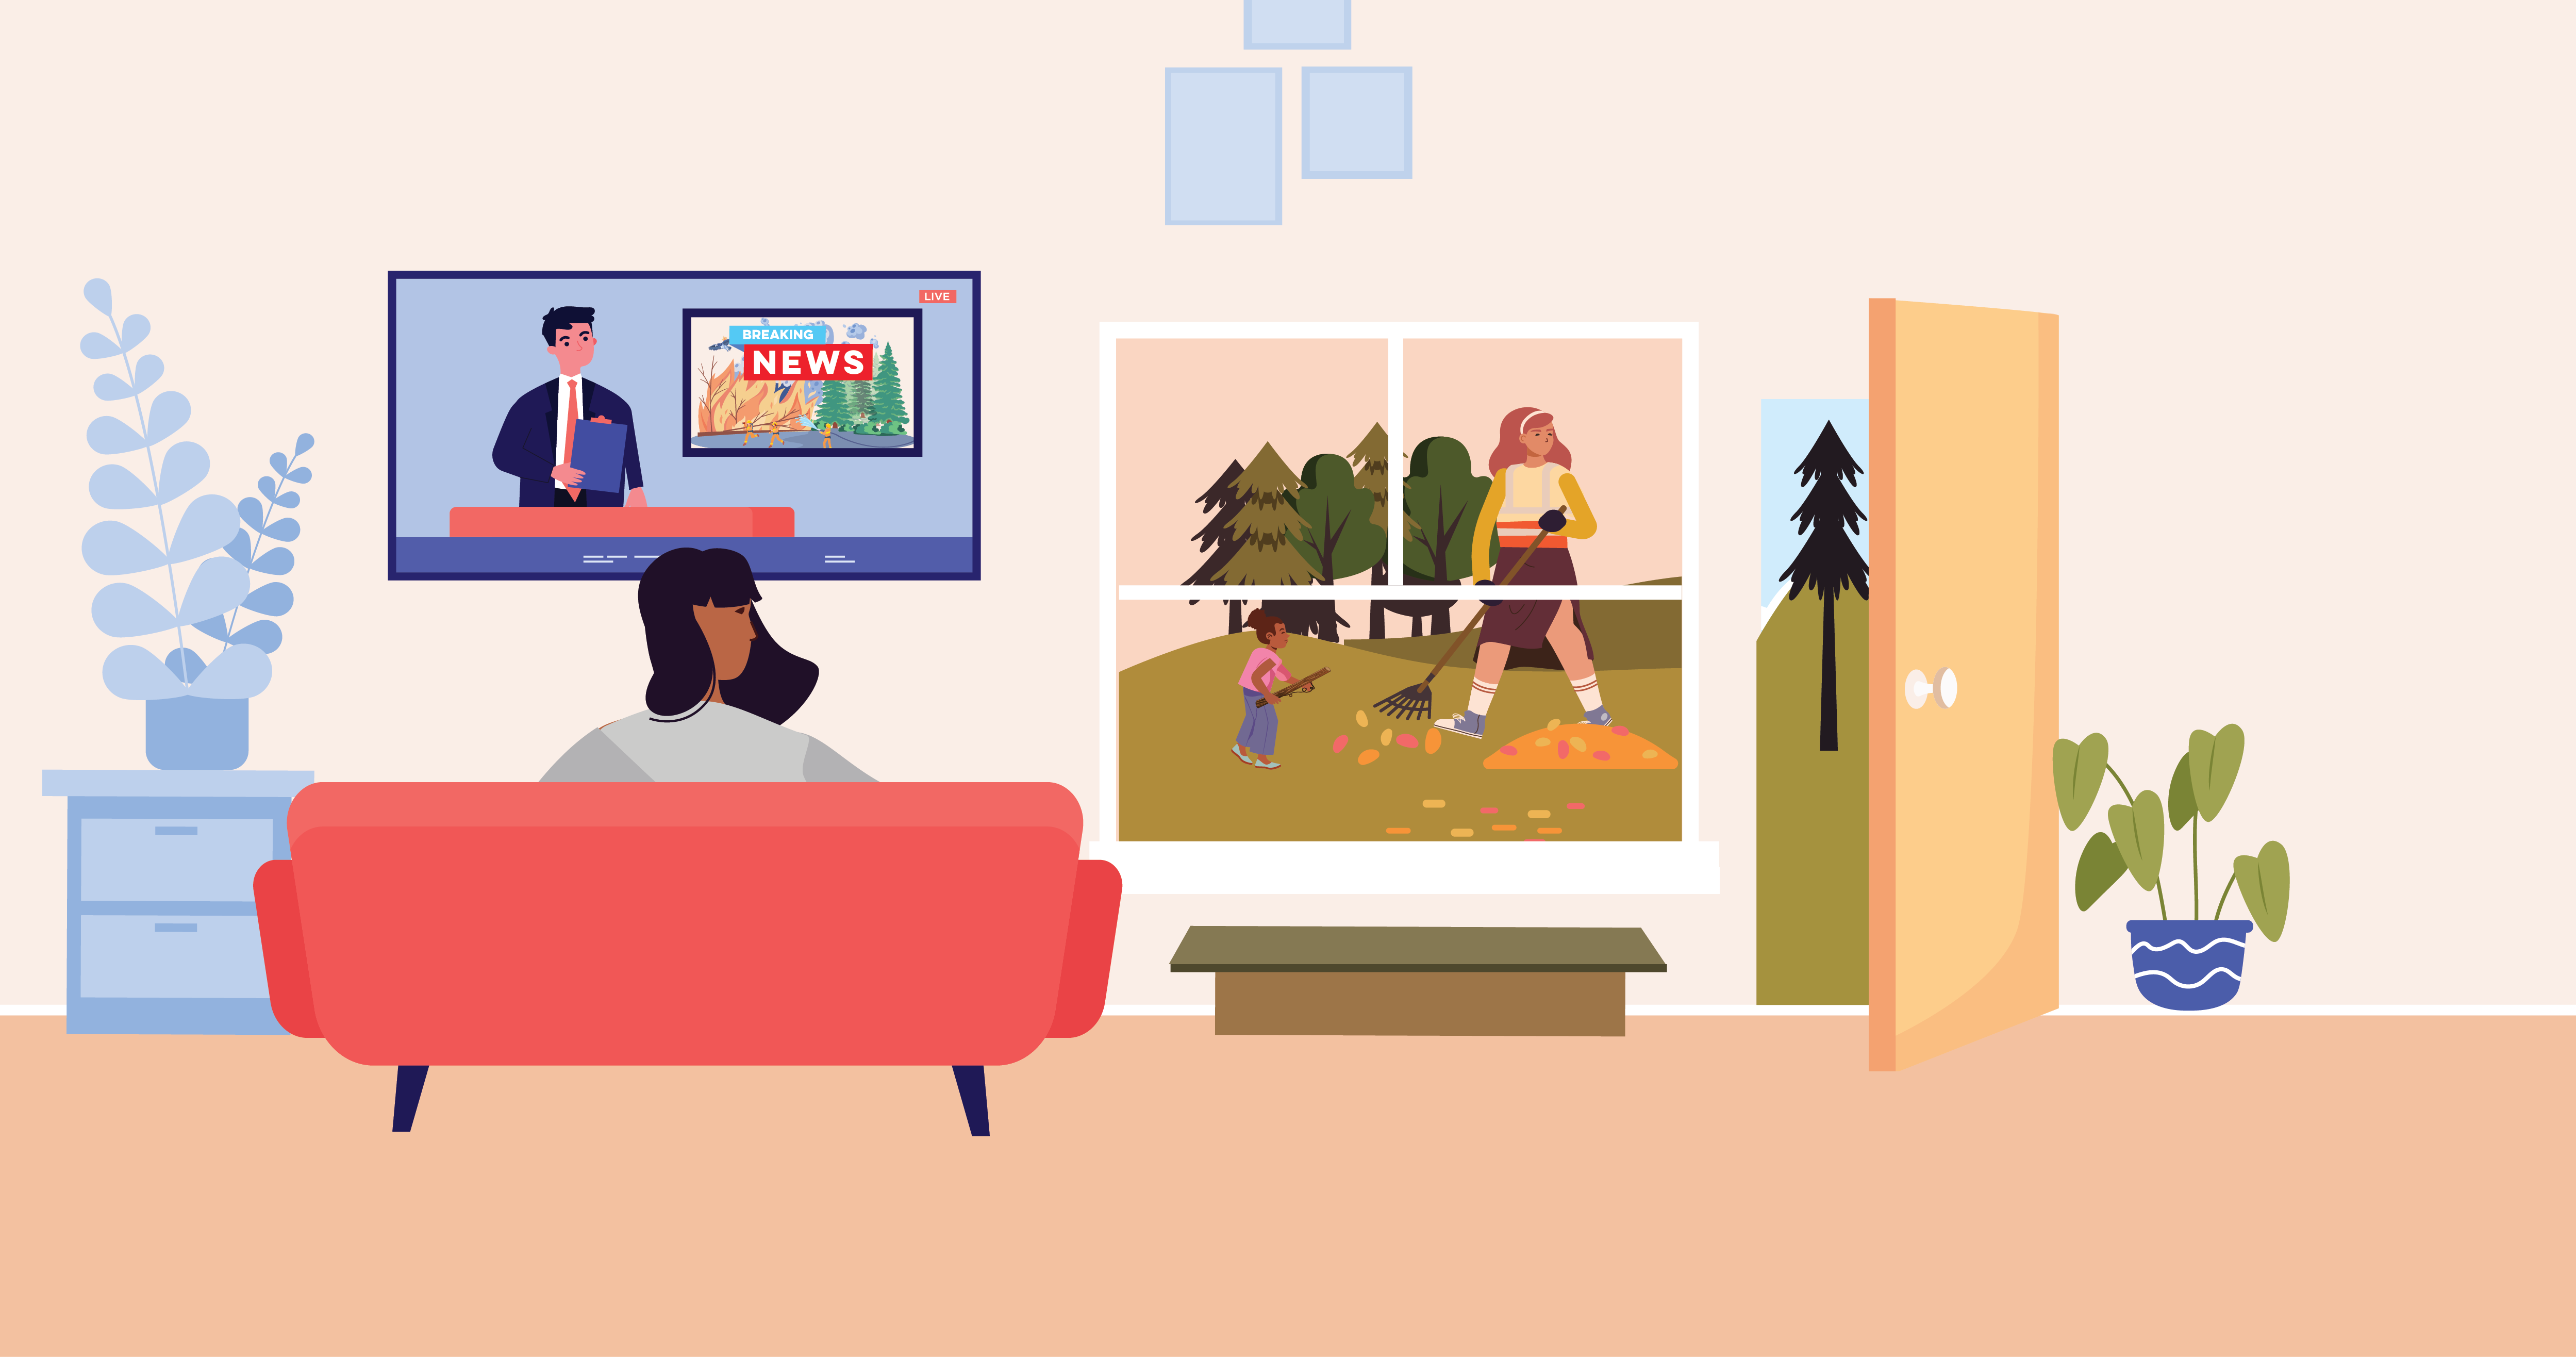 Comic strip style image: woman sitting on couch watching local breaking news coverage of a wildfire on television. Other woman and girl are visible through a window and they are raking leaves and picking up sticks to ready their home for potential wildfire.